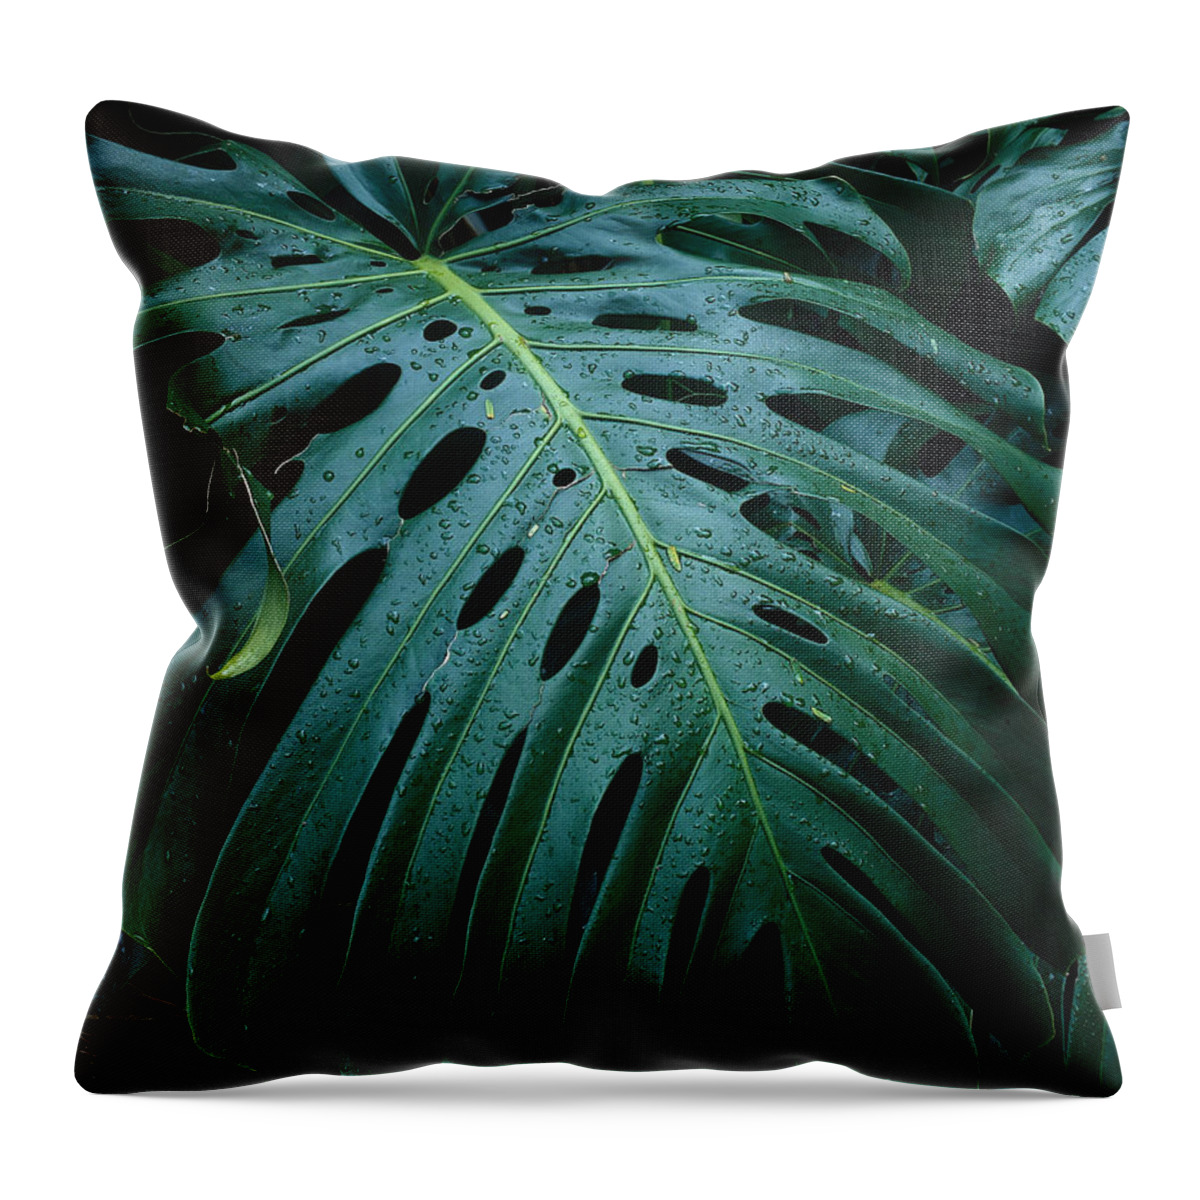 Monstera Plant Throw Pillow featuring the photograph Monstera Plant by Tracy Knauer